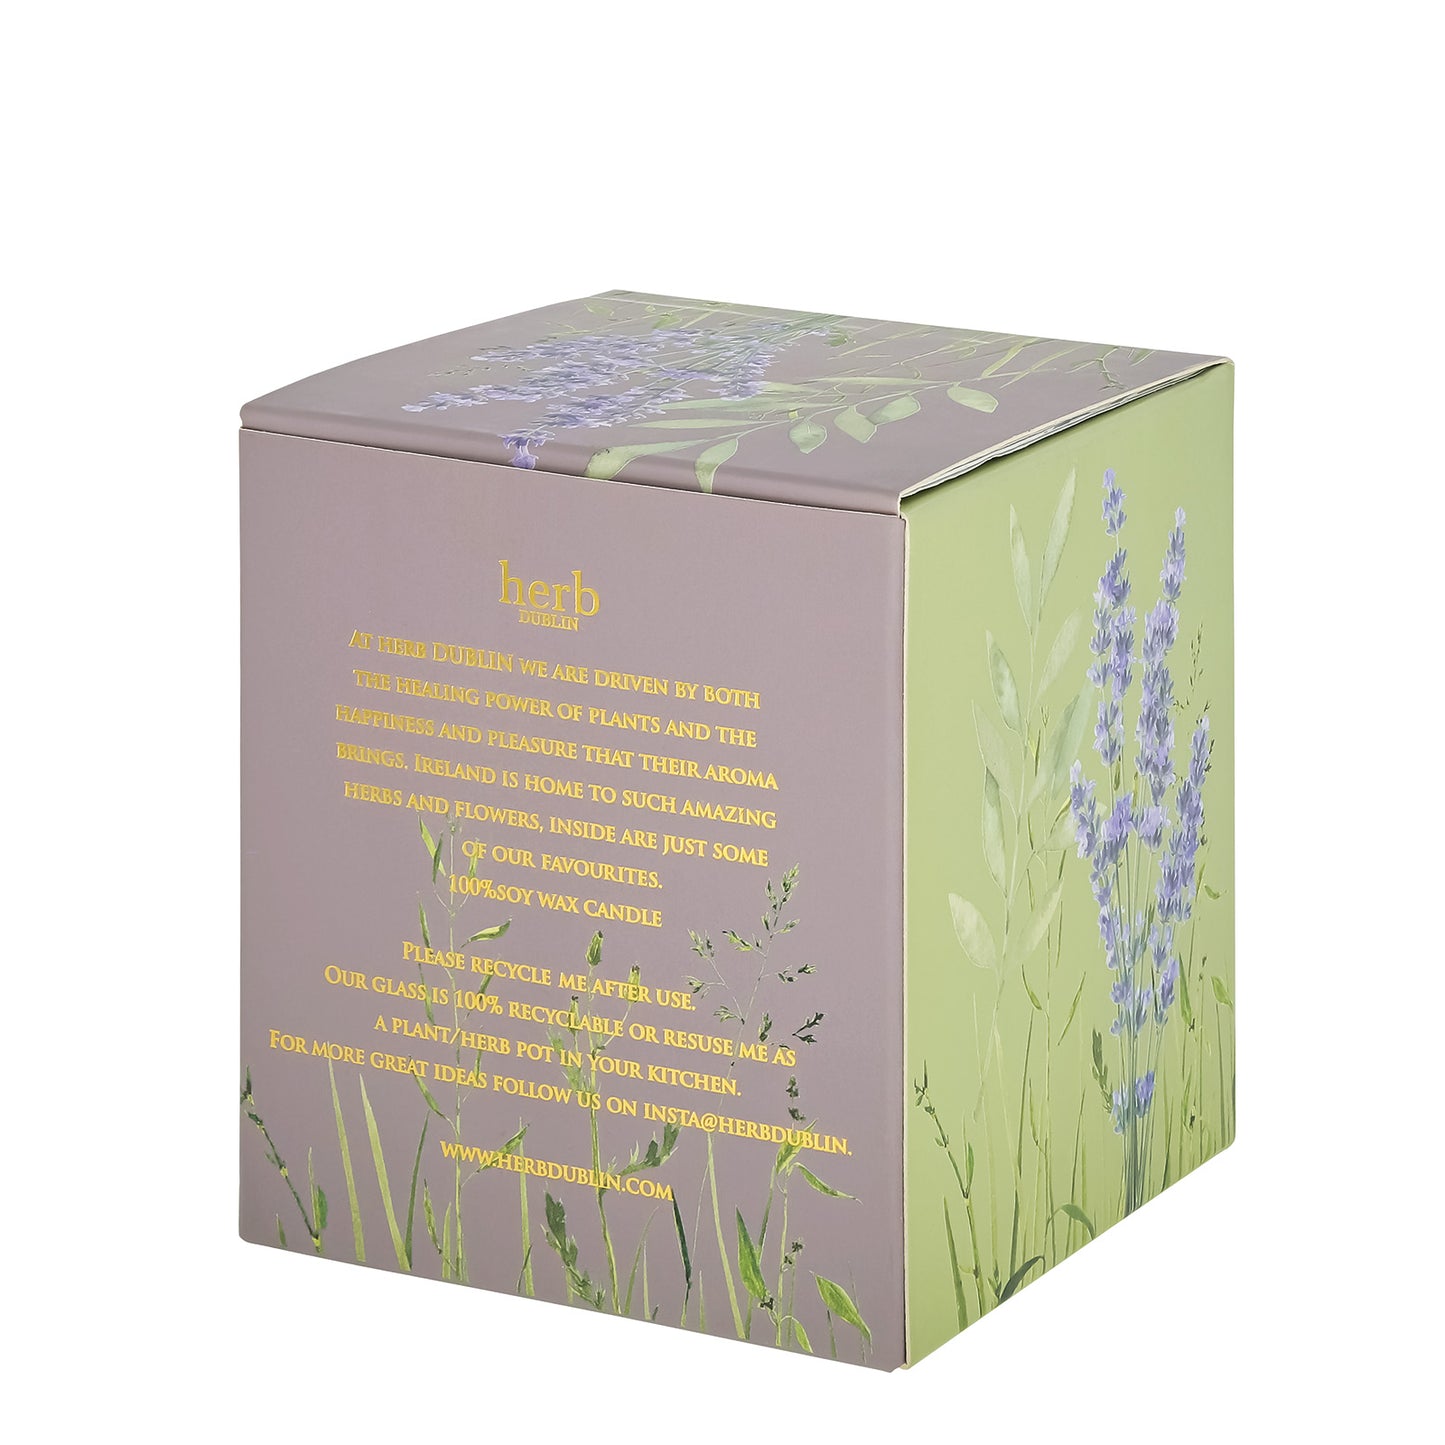 Herb Dublin Lavender & Rosemary Candle